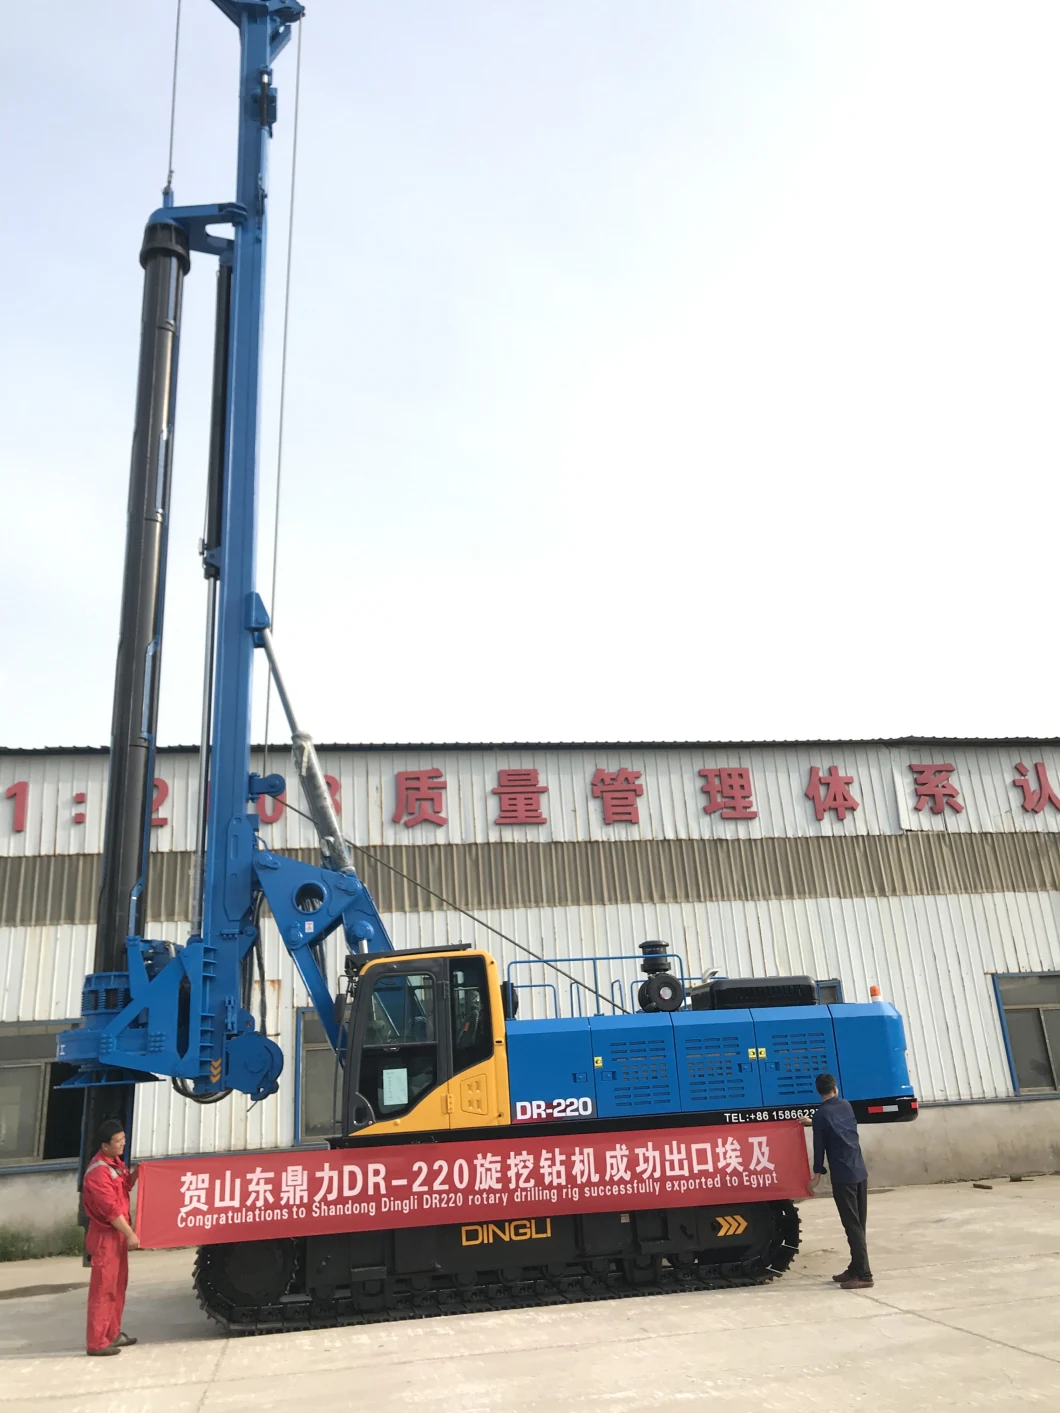 Yahe Heavy Industry Portable Coring Drilling Rig